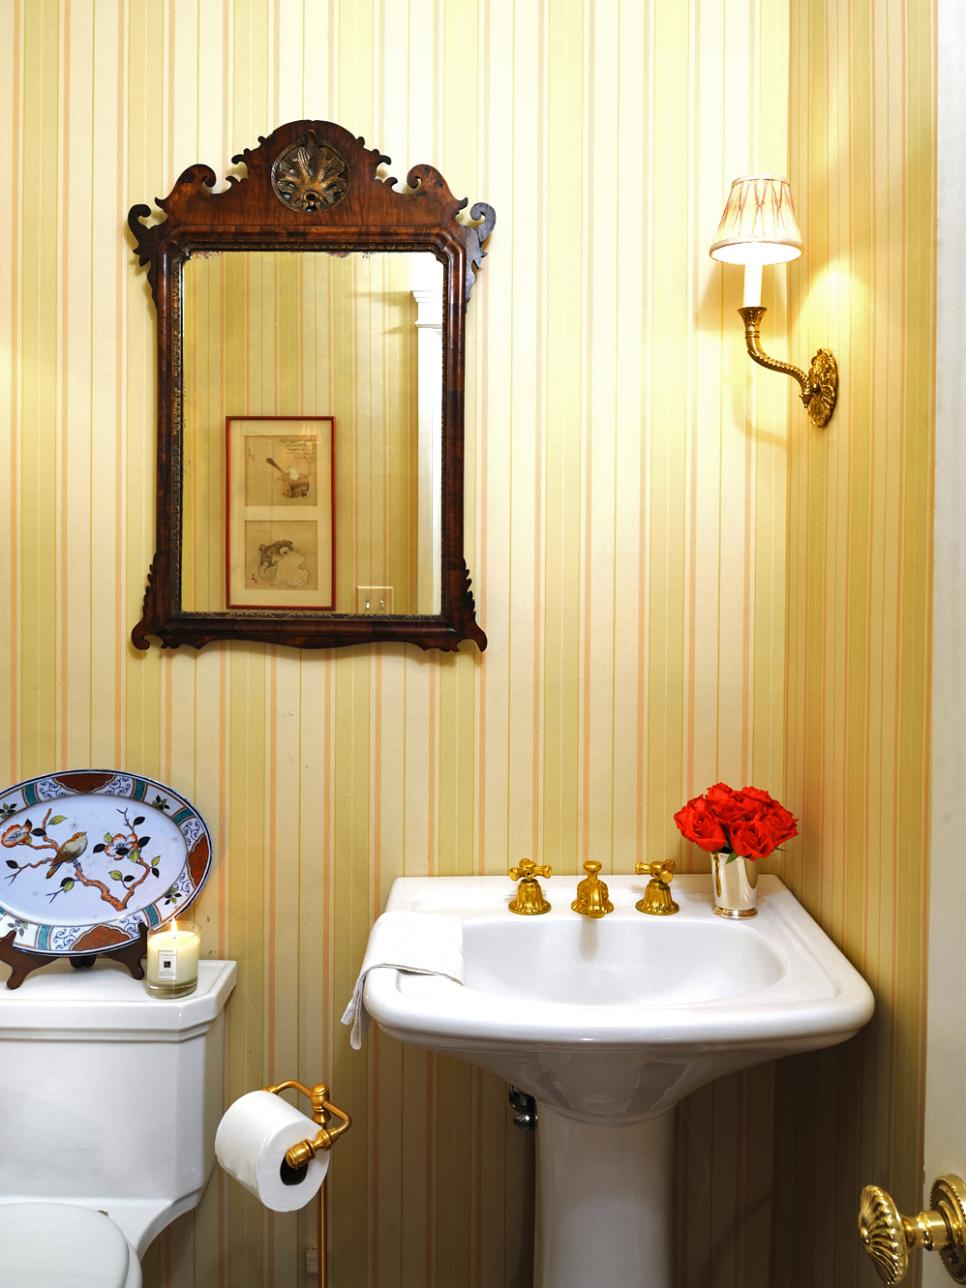 Powder Room With Striped Yellow Wallpaper and Pedestal Sink